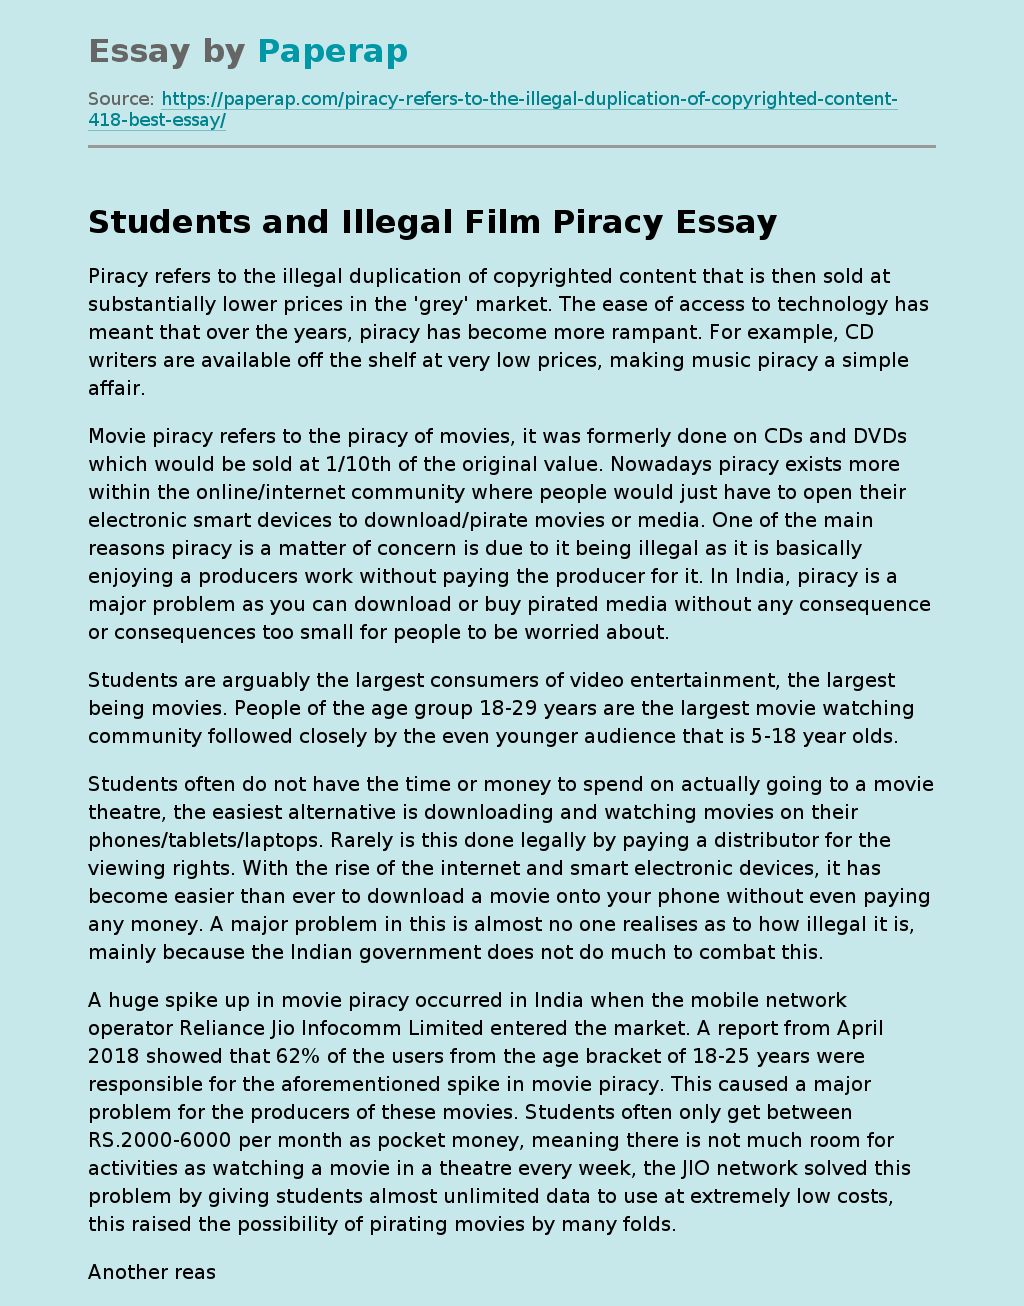 Students and Illegal Film Piracy